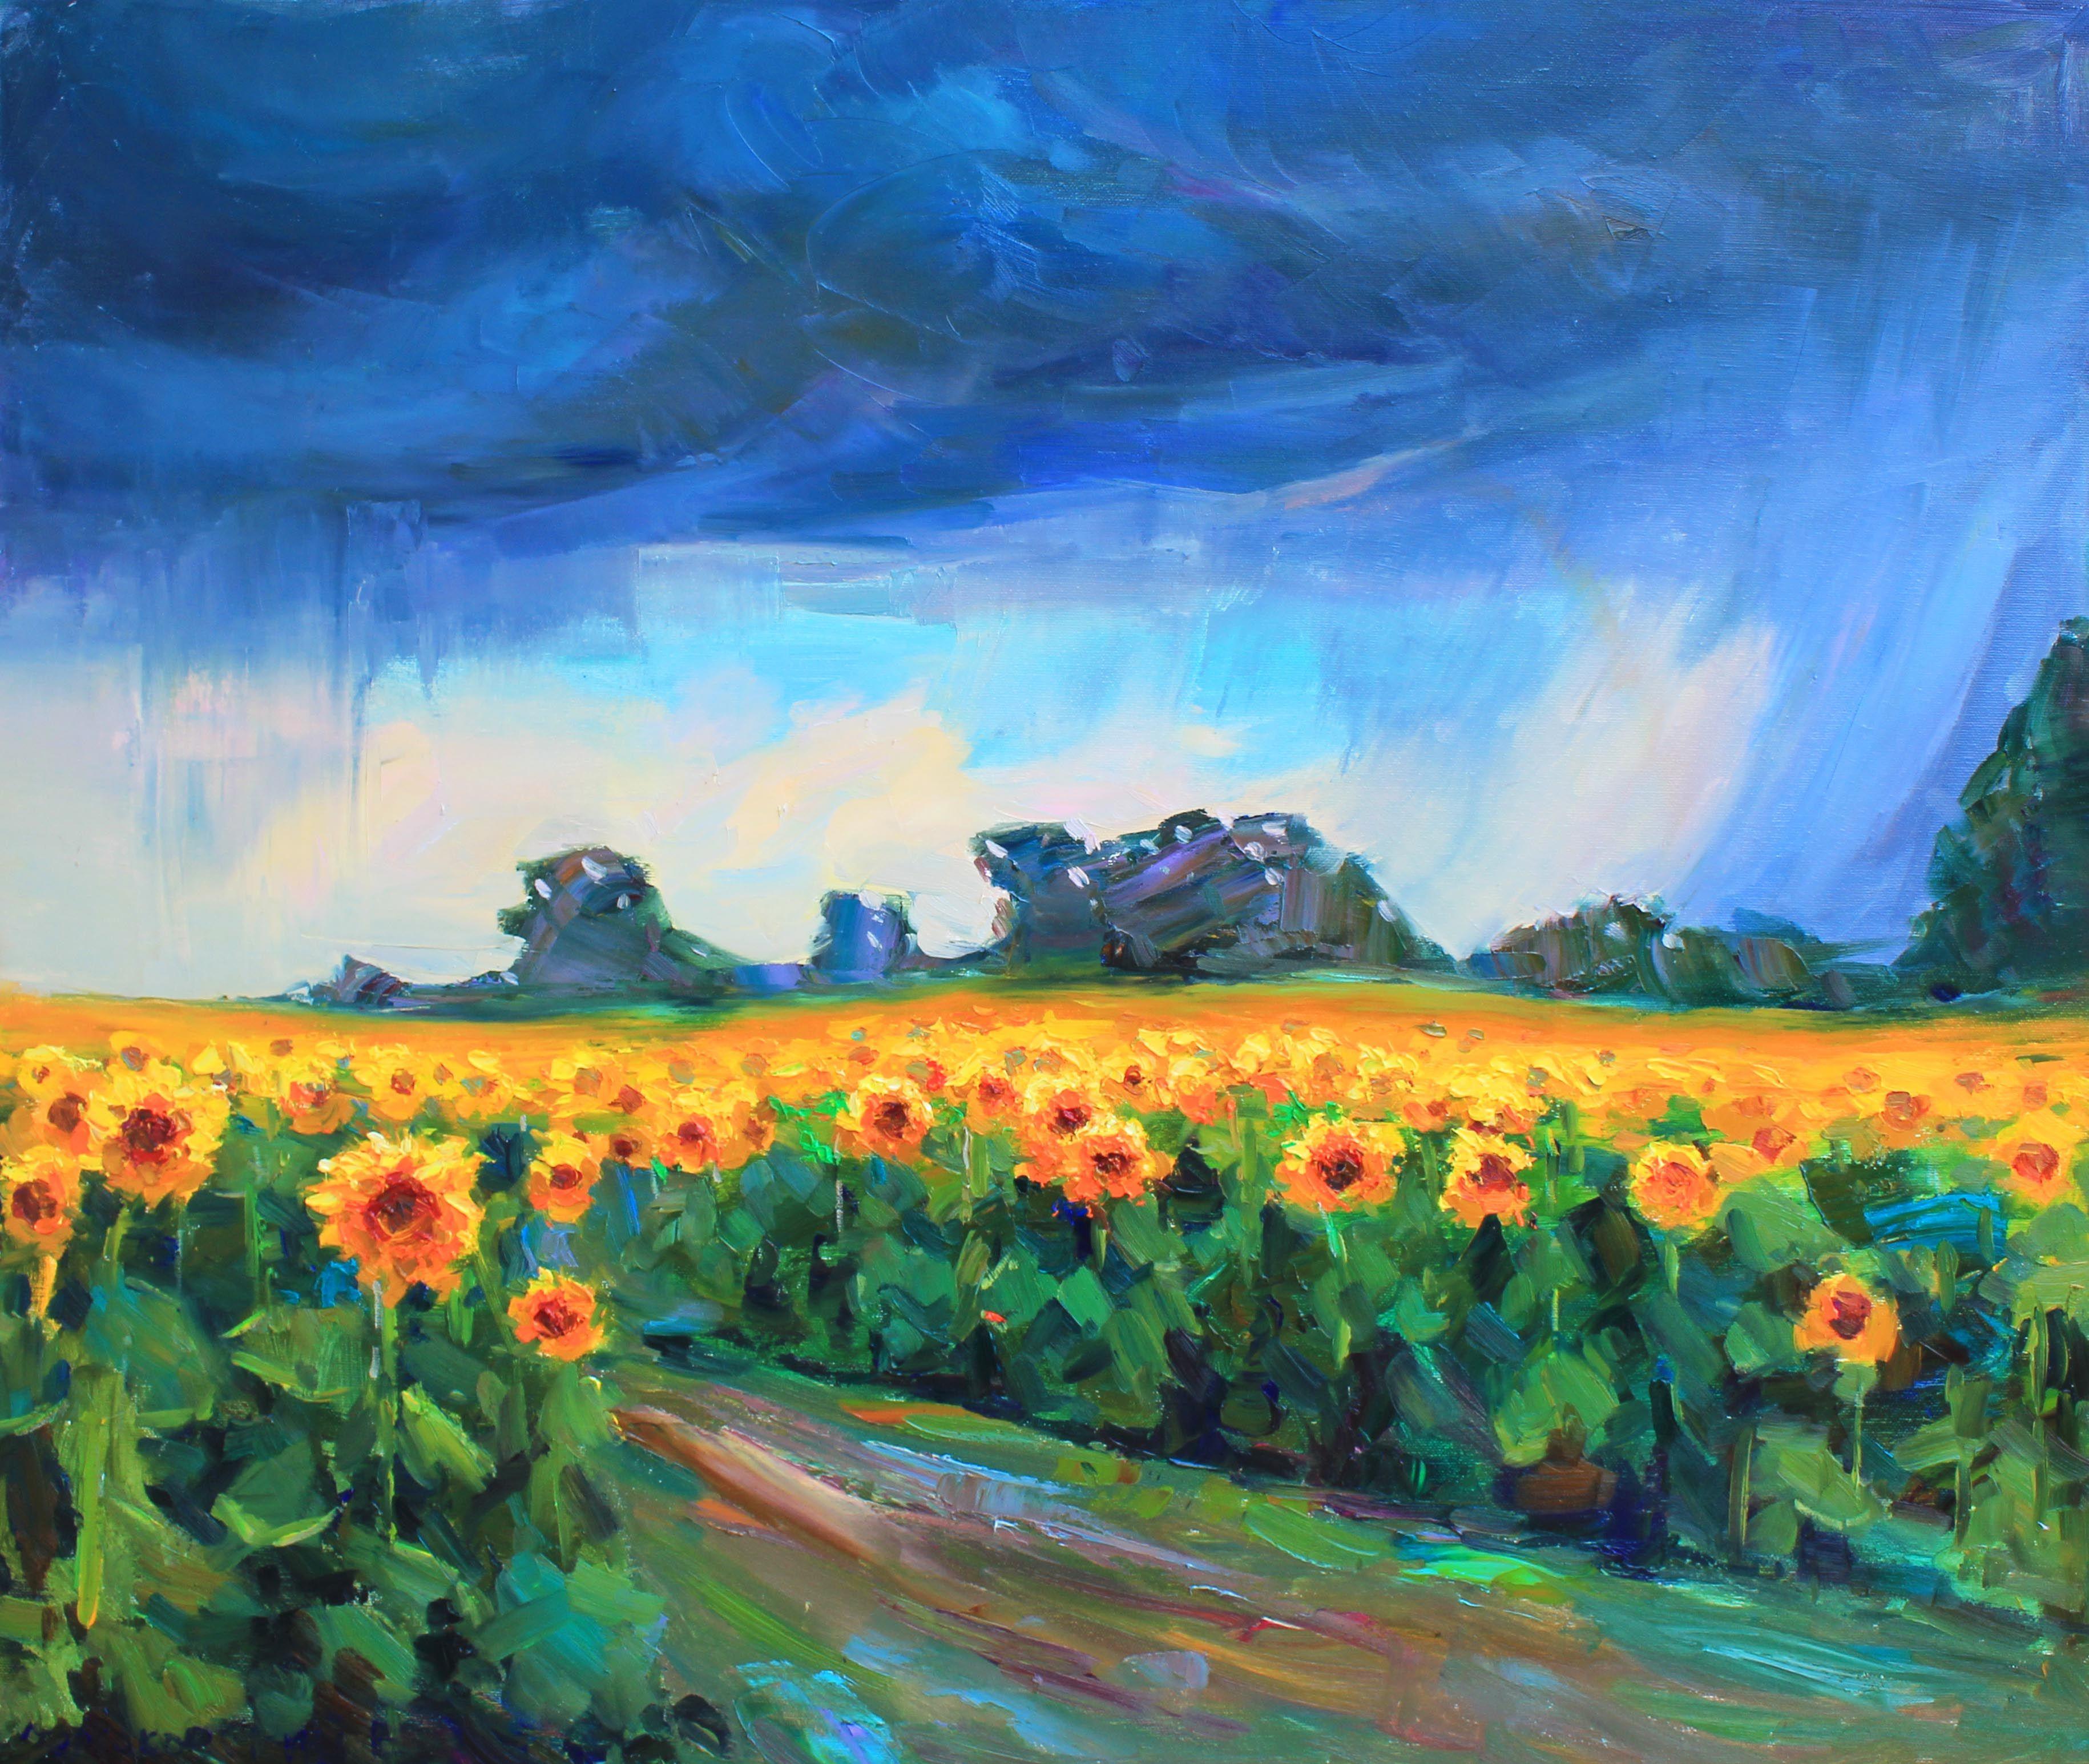 Original Oil painting by Ukrainian artist Evgeny Chernyakovsky    "  Sunflowers"  70.0 X 80.0 CM / 27.5 X 31.4 IN  HIGH QUALITY oil on canvas  Signed on the front and back  Dated 2022  Good condition  GUARANTEE OF AUTHENTICITY   :: Painting ::